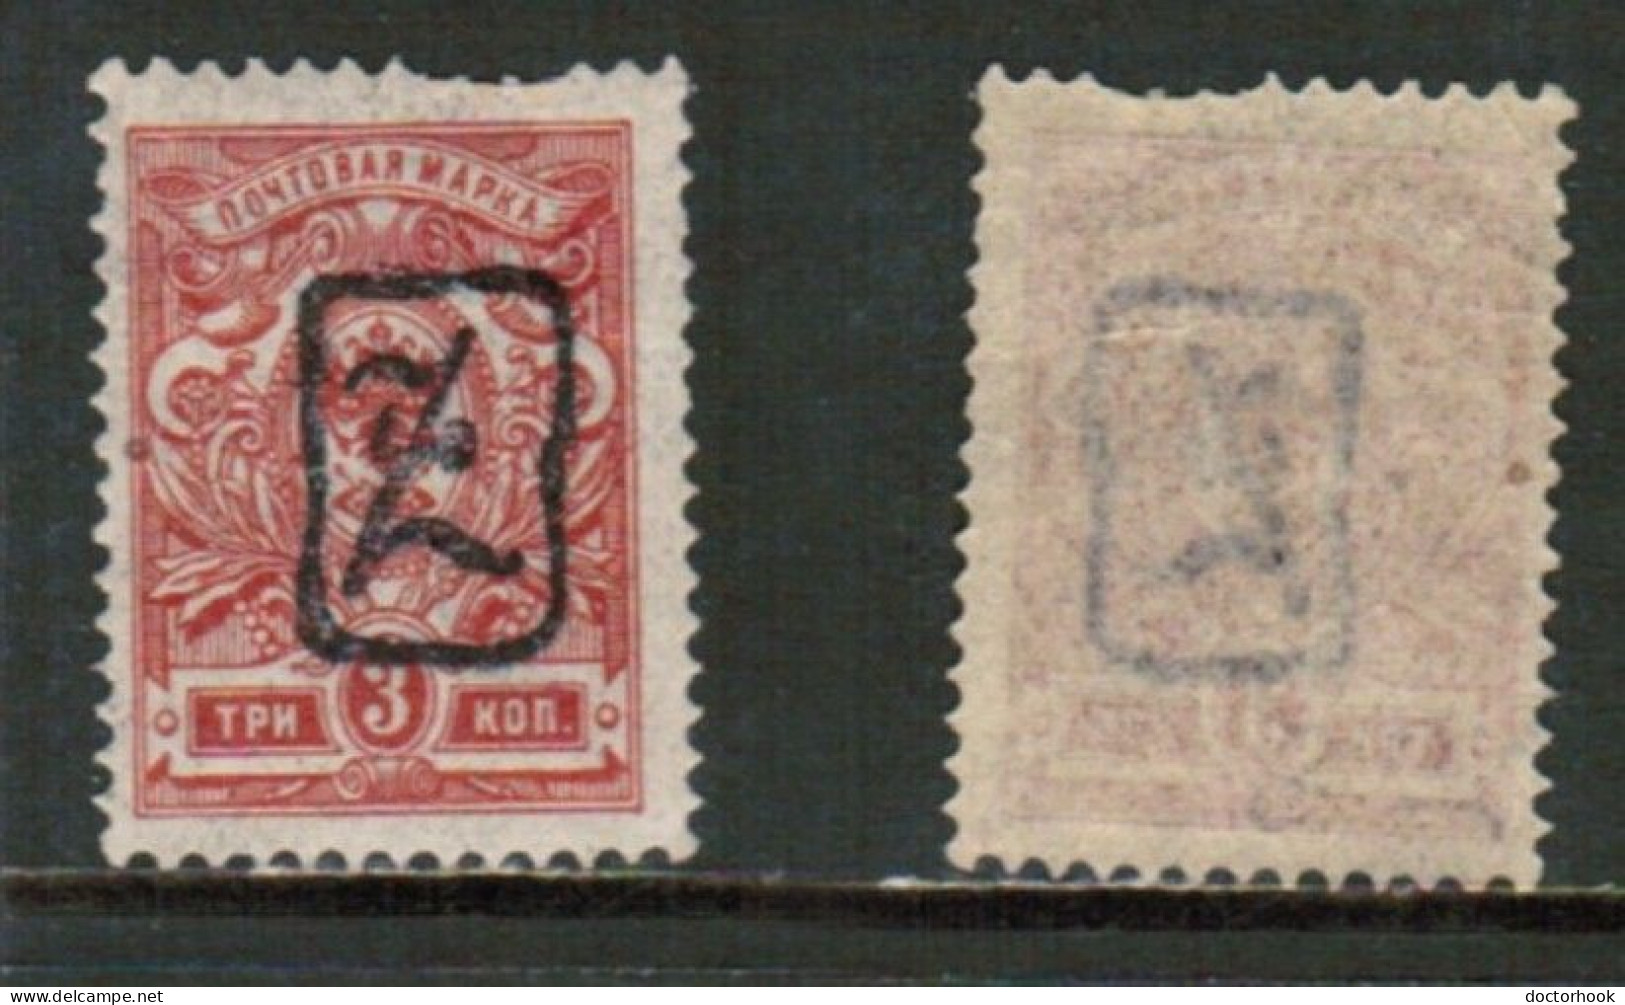 ARMANIA   Scott # 32a** MINT NH (CONDITION AS PER SCAN) (Stamp Scan # 920-7) - Armenien